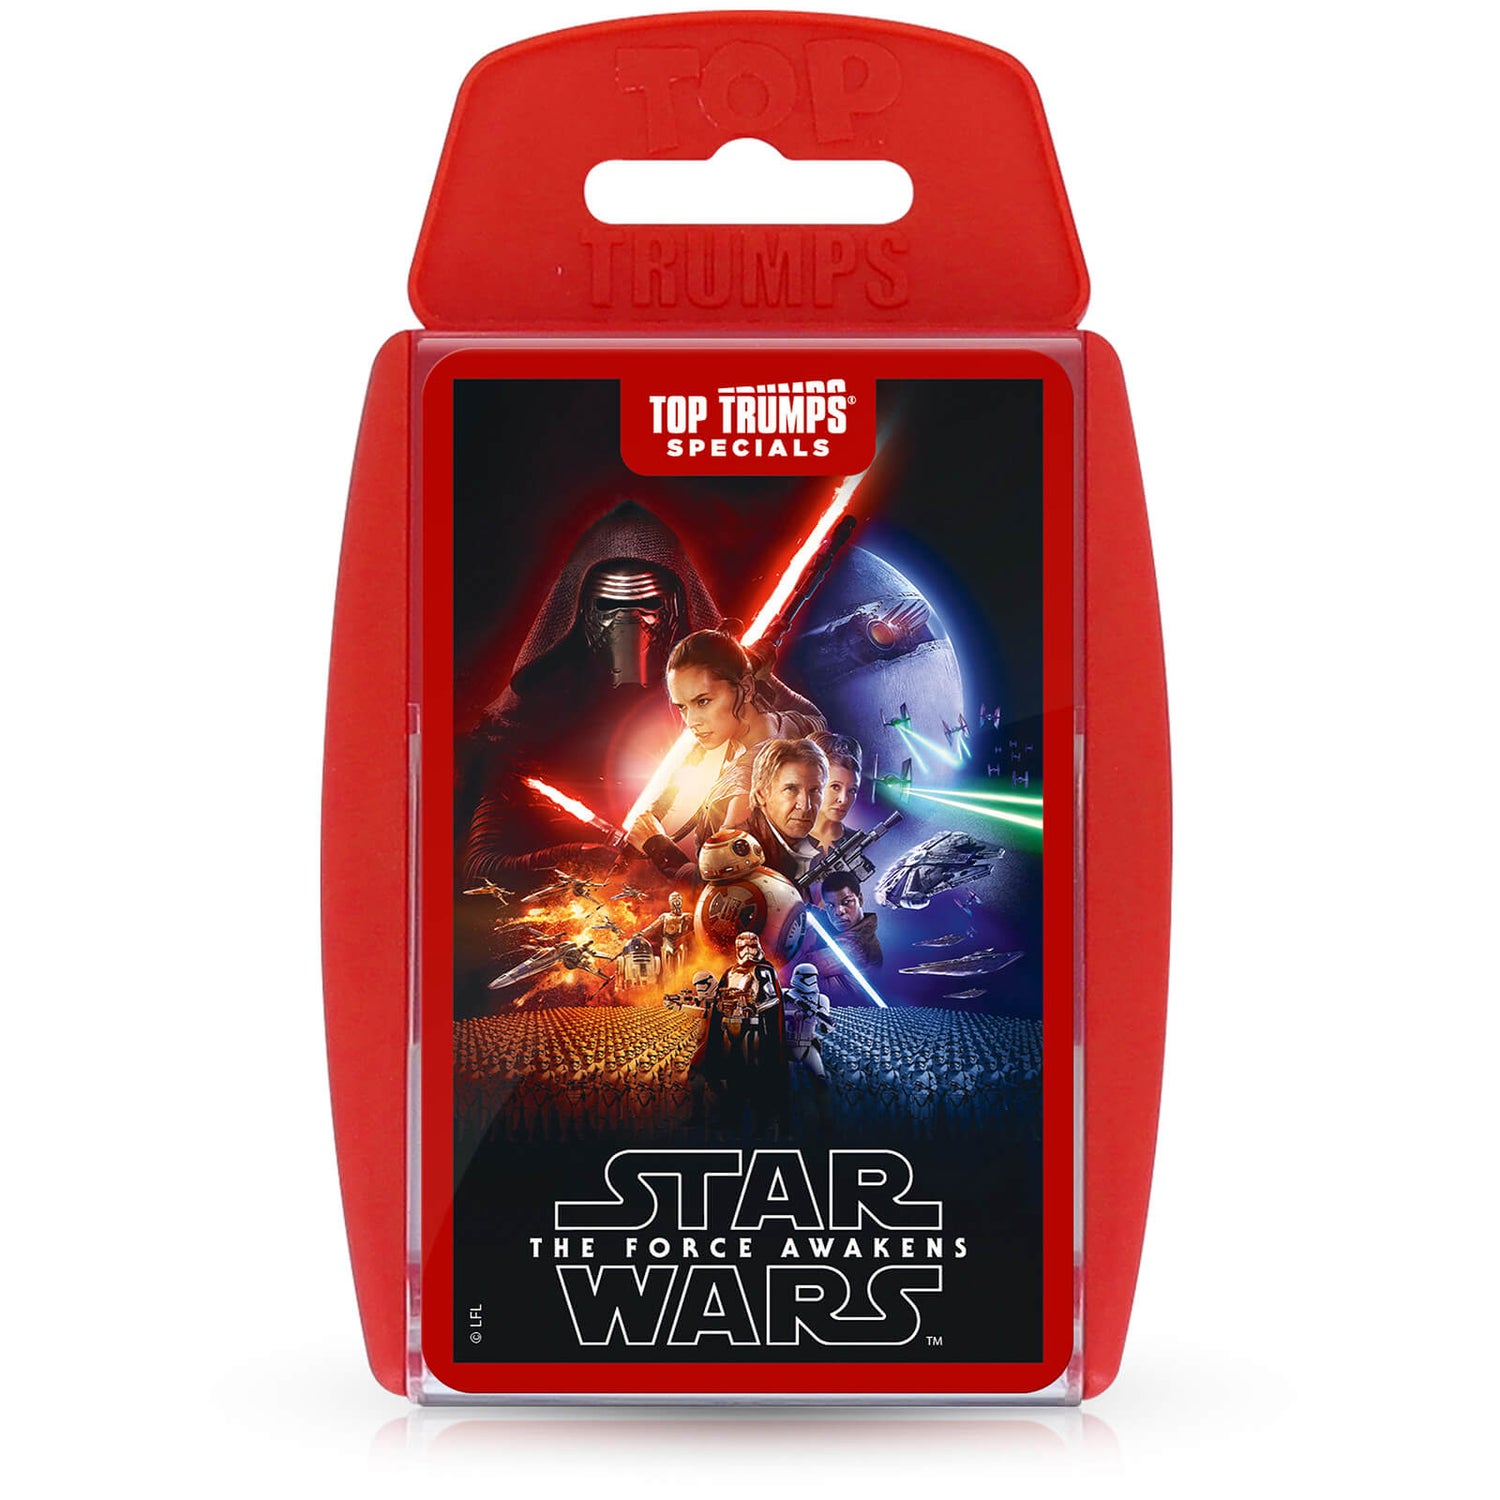 Top Trumps Specials - Star Wars: The Force Awakens Edition